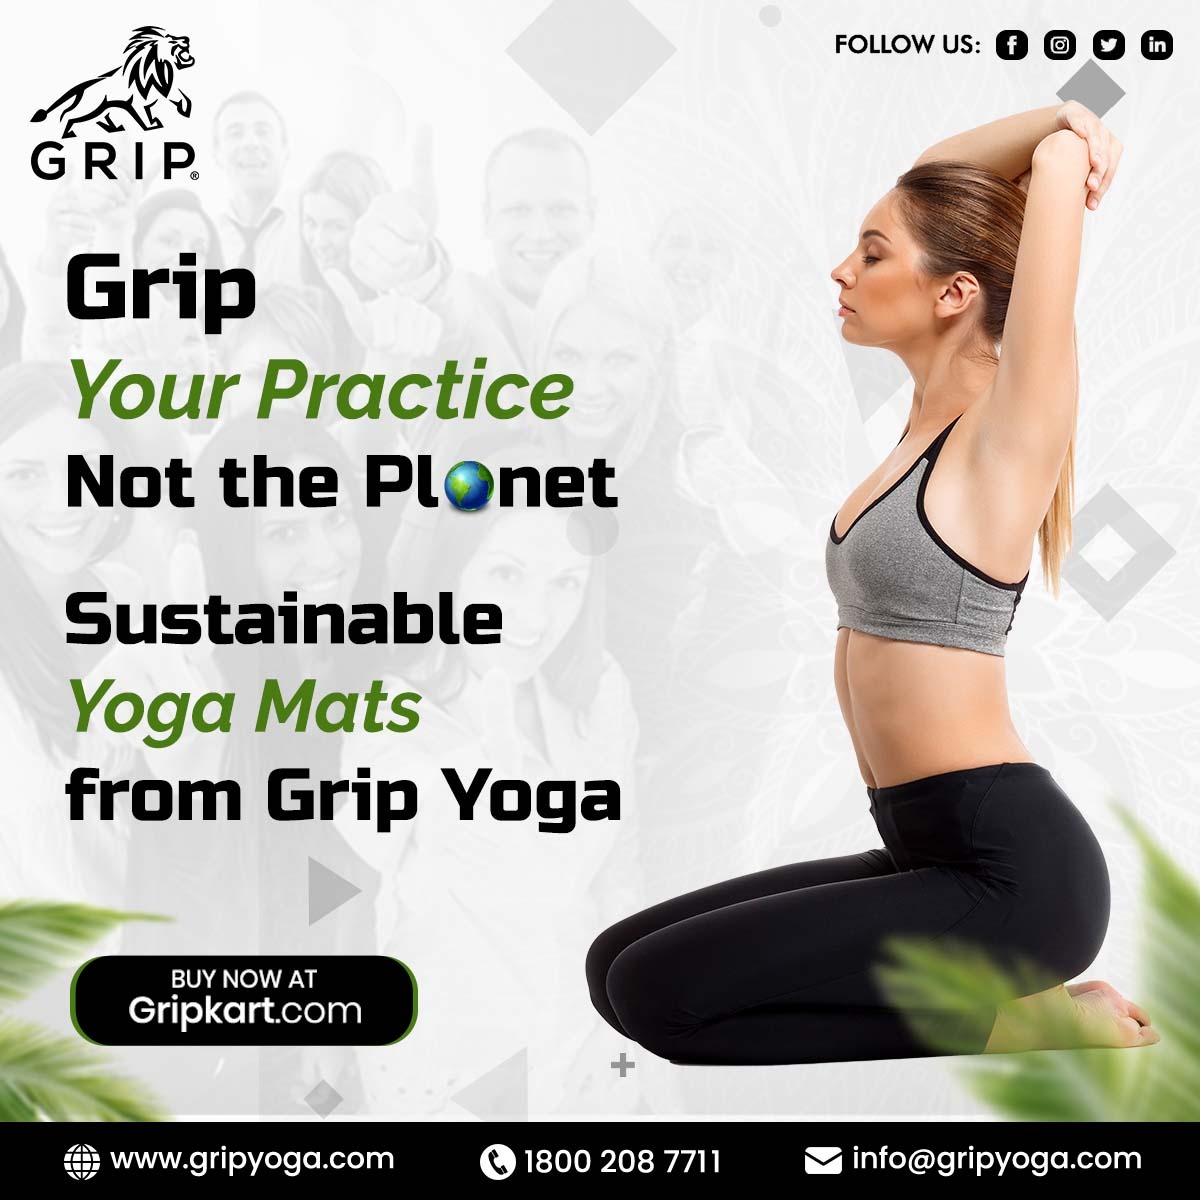 #Grip Your Practice,Not the Planet: Sustainable Yoga Mats from Grip Yoga.
👉👉You may also order online at gripkart.com
👉👉You may also call us at Toll-Free No: 1800 208 7711
👉👉Whats App at 098919 07711
#SportsMat #YogaAccessories #SportsAccessories #Meditation